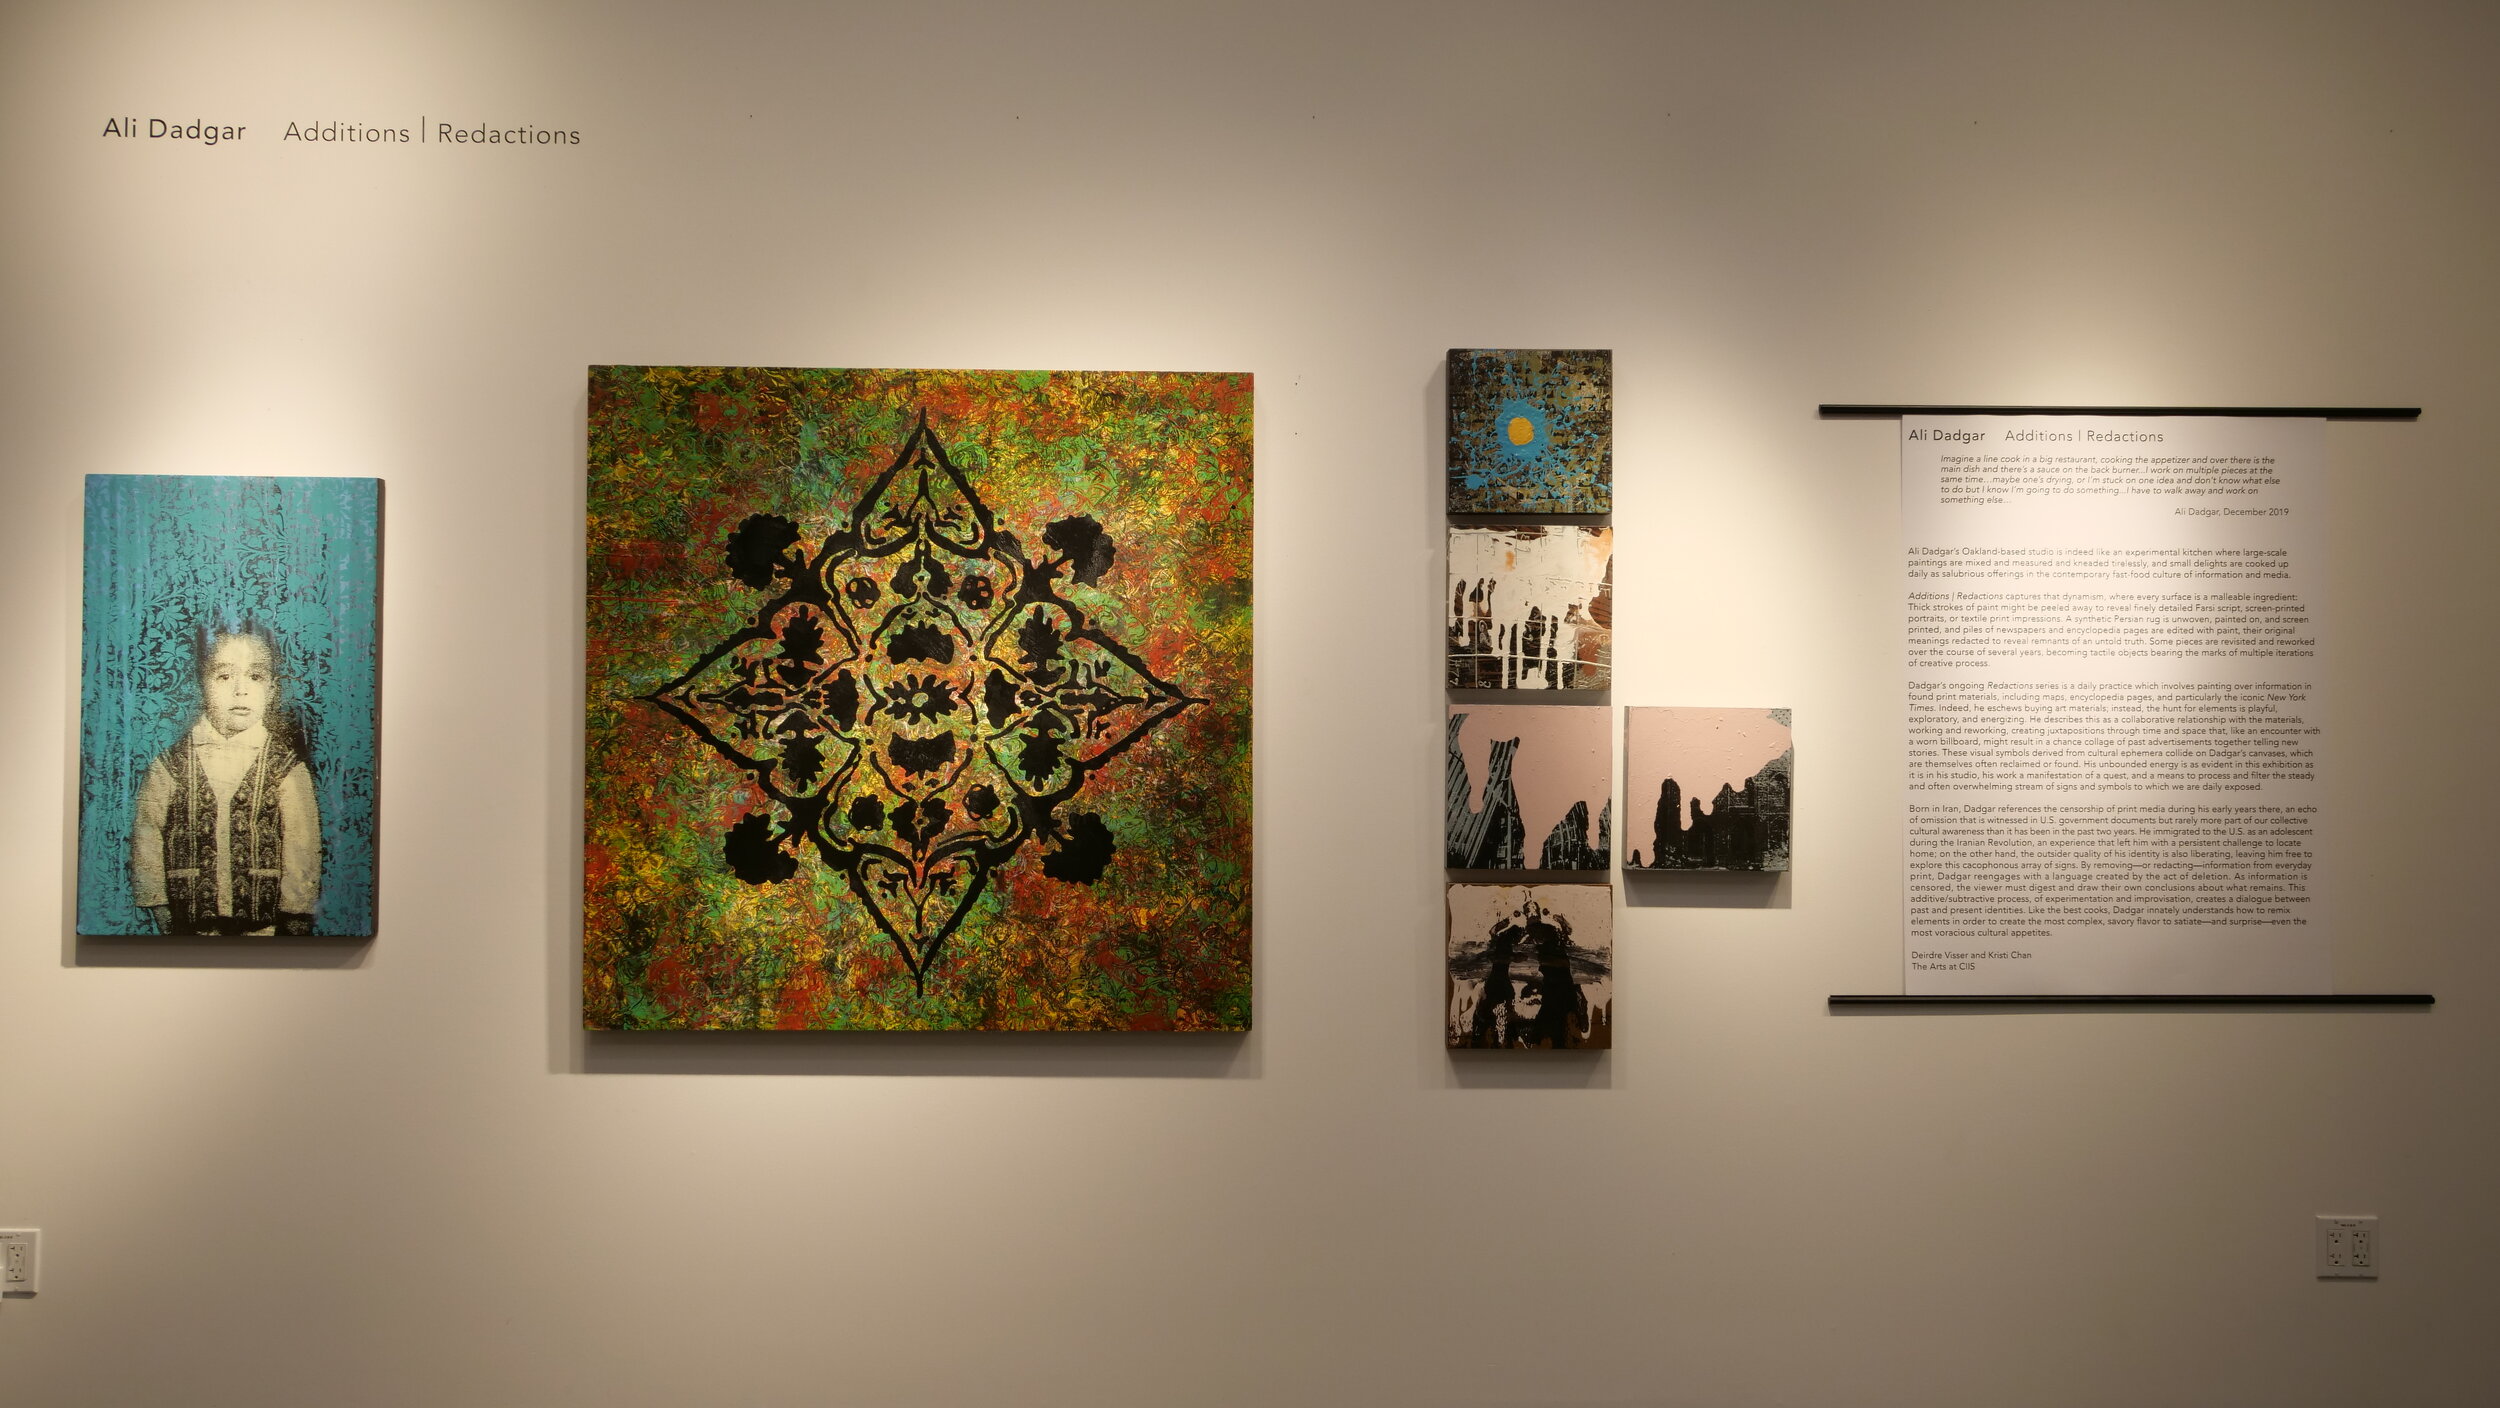 Display of paintings featuring a large square piece.  Black leaves and flourishes create a mandala like design on a mottled green and rust background.